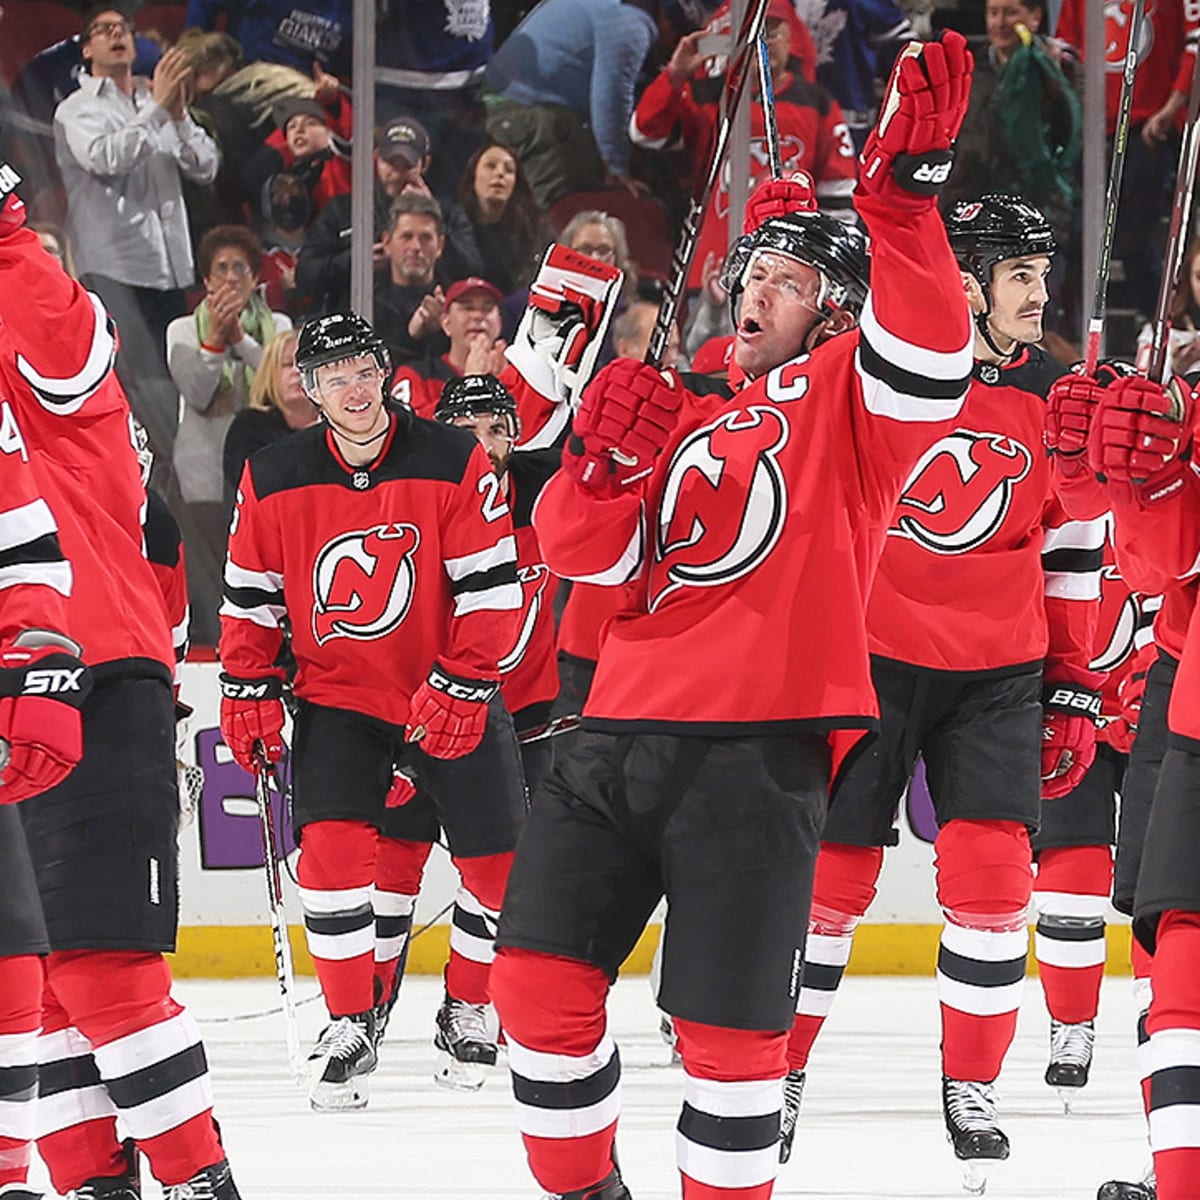 2012 Stanley Cup: Devils Beat Panthers in Game 7 - The New York Times